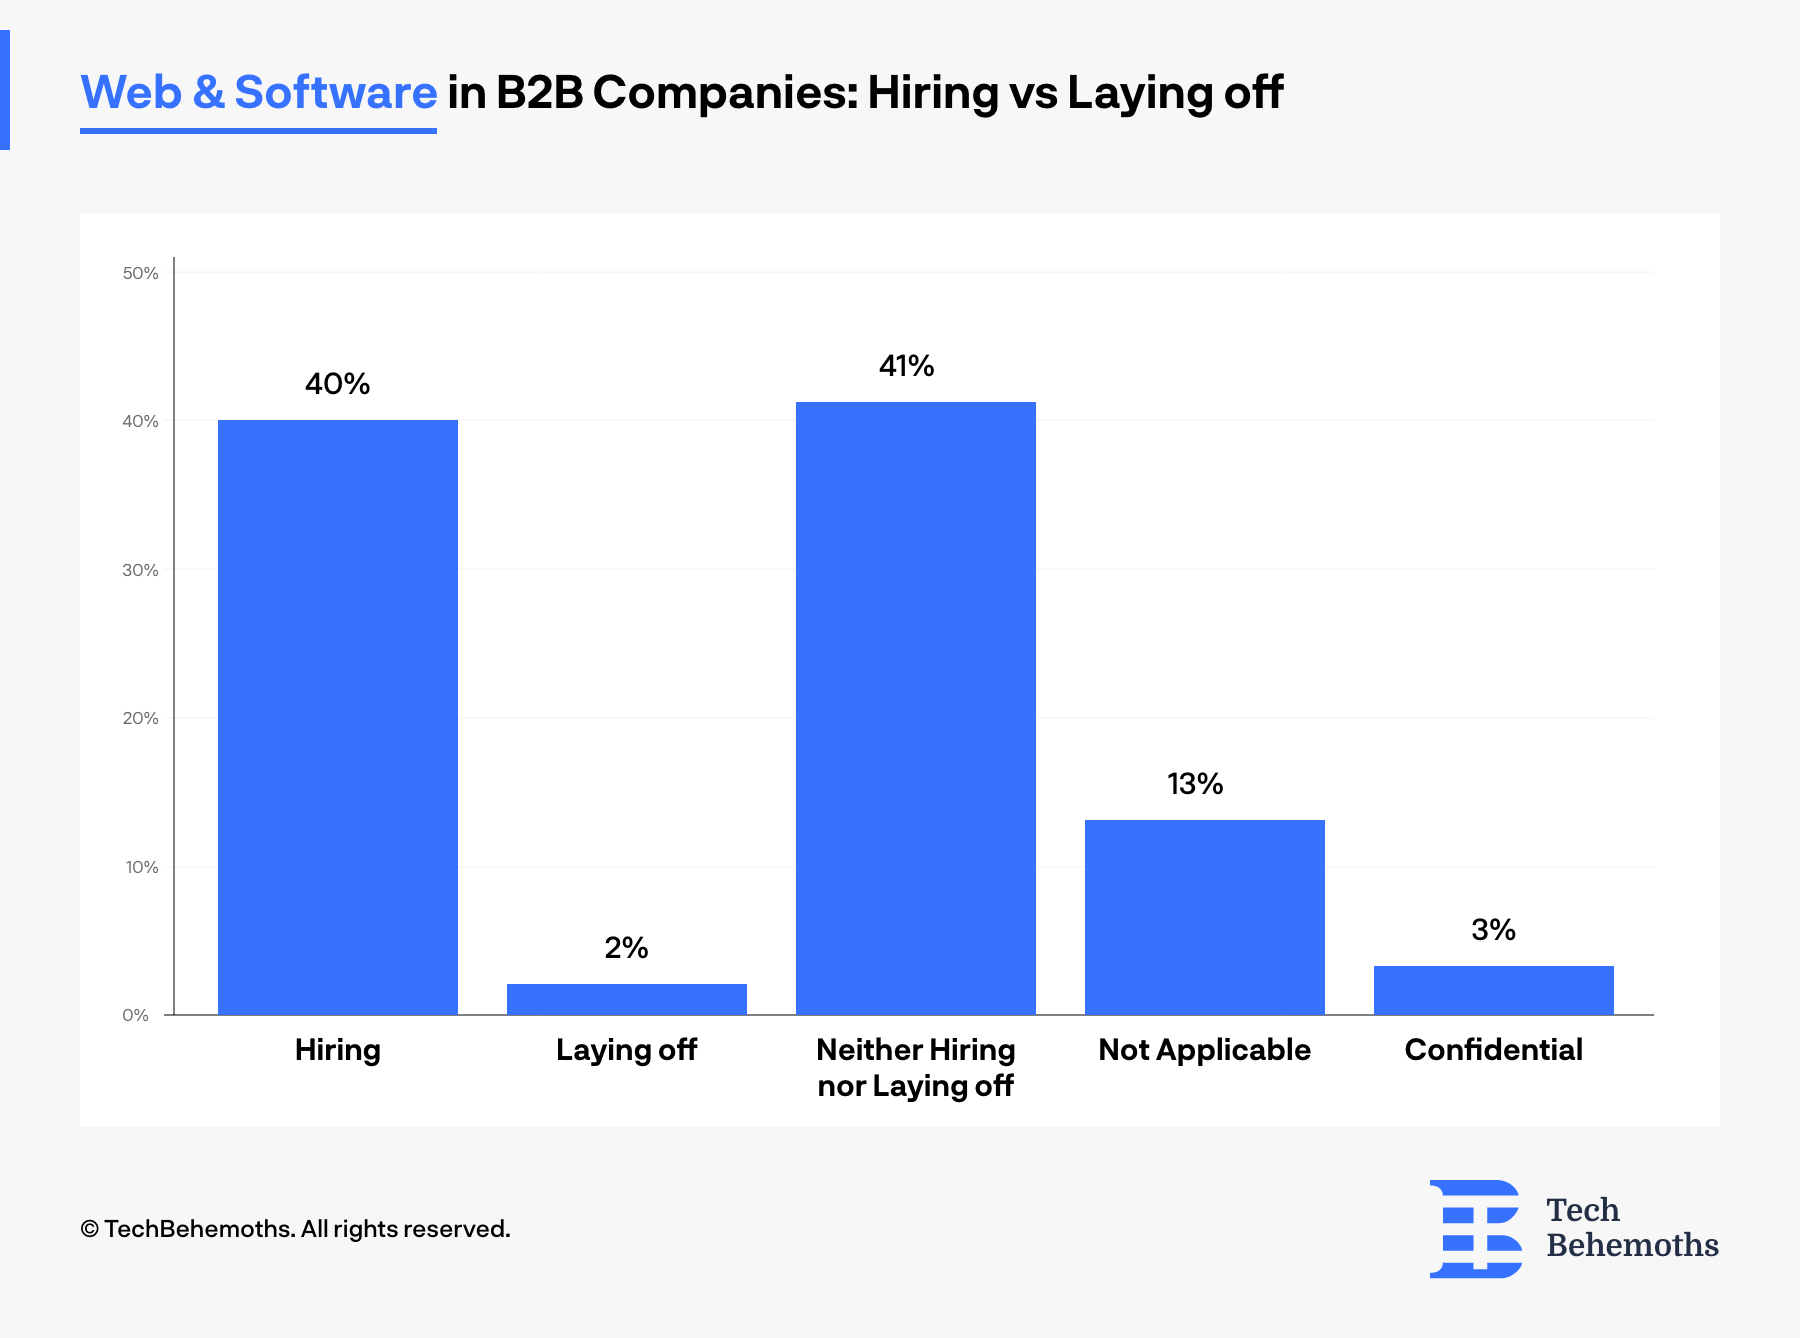 31.03% of companies are hiring new web and software developers according to TechBehemoths 2023 survey results